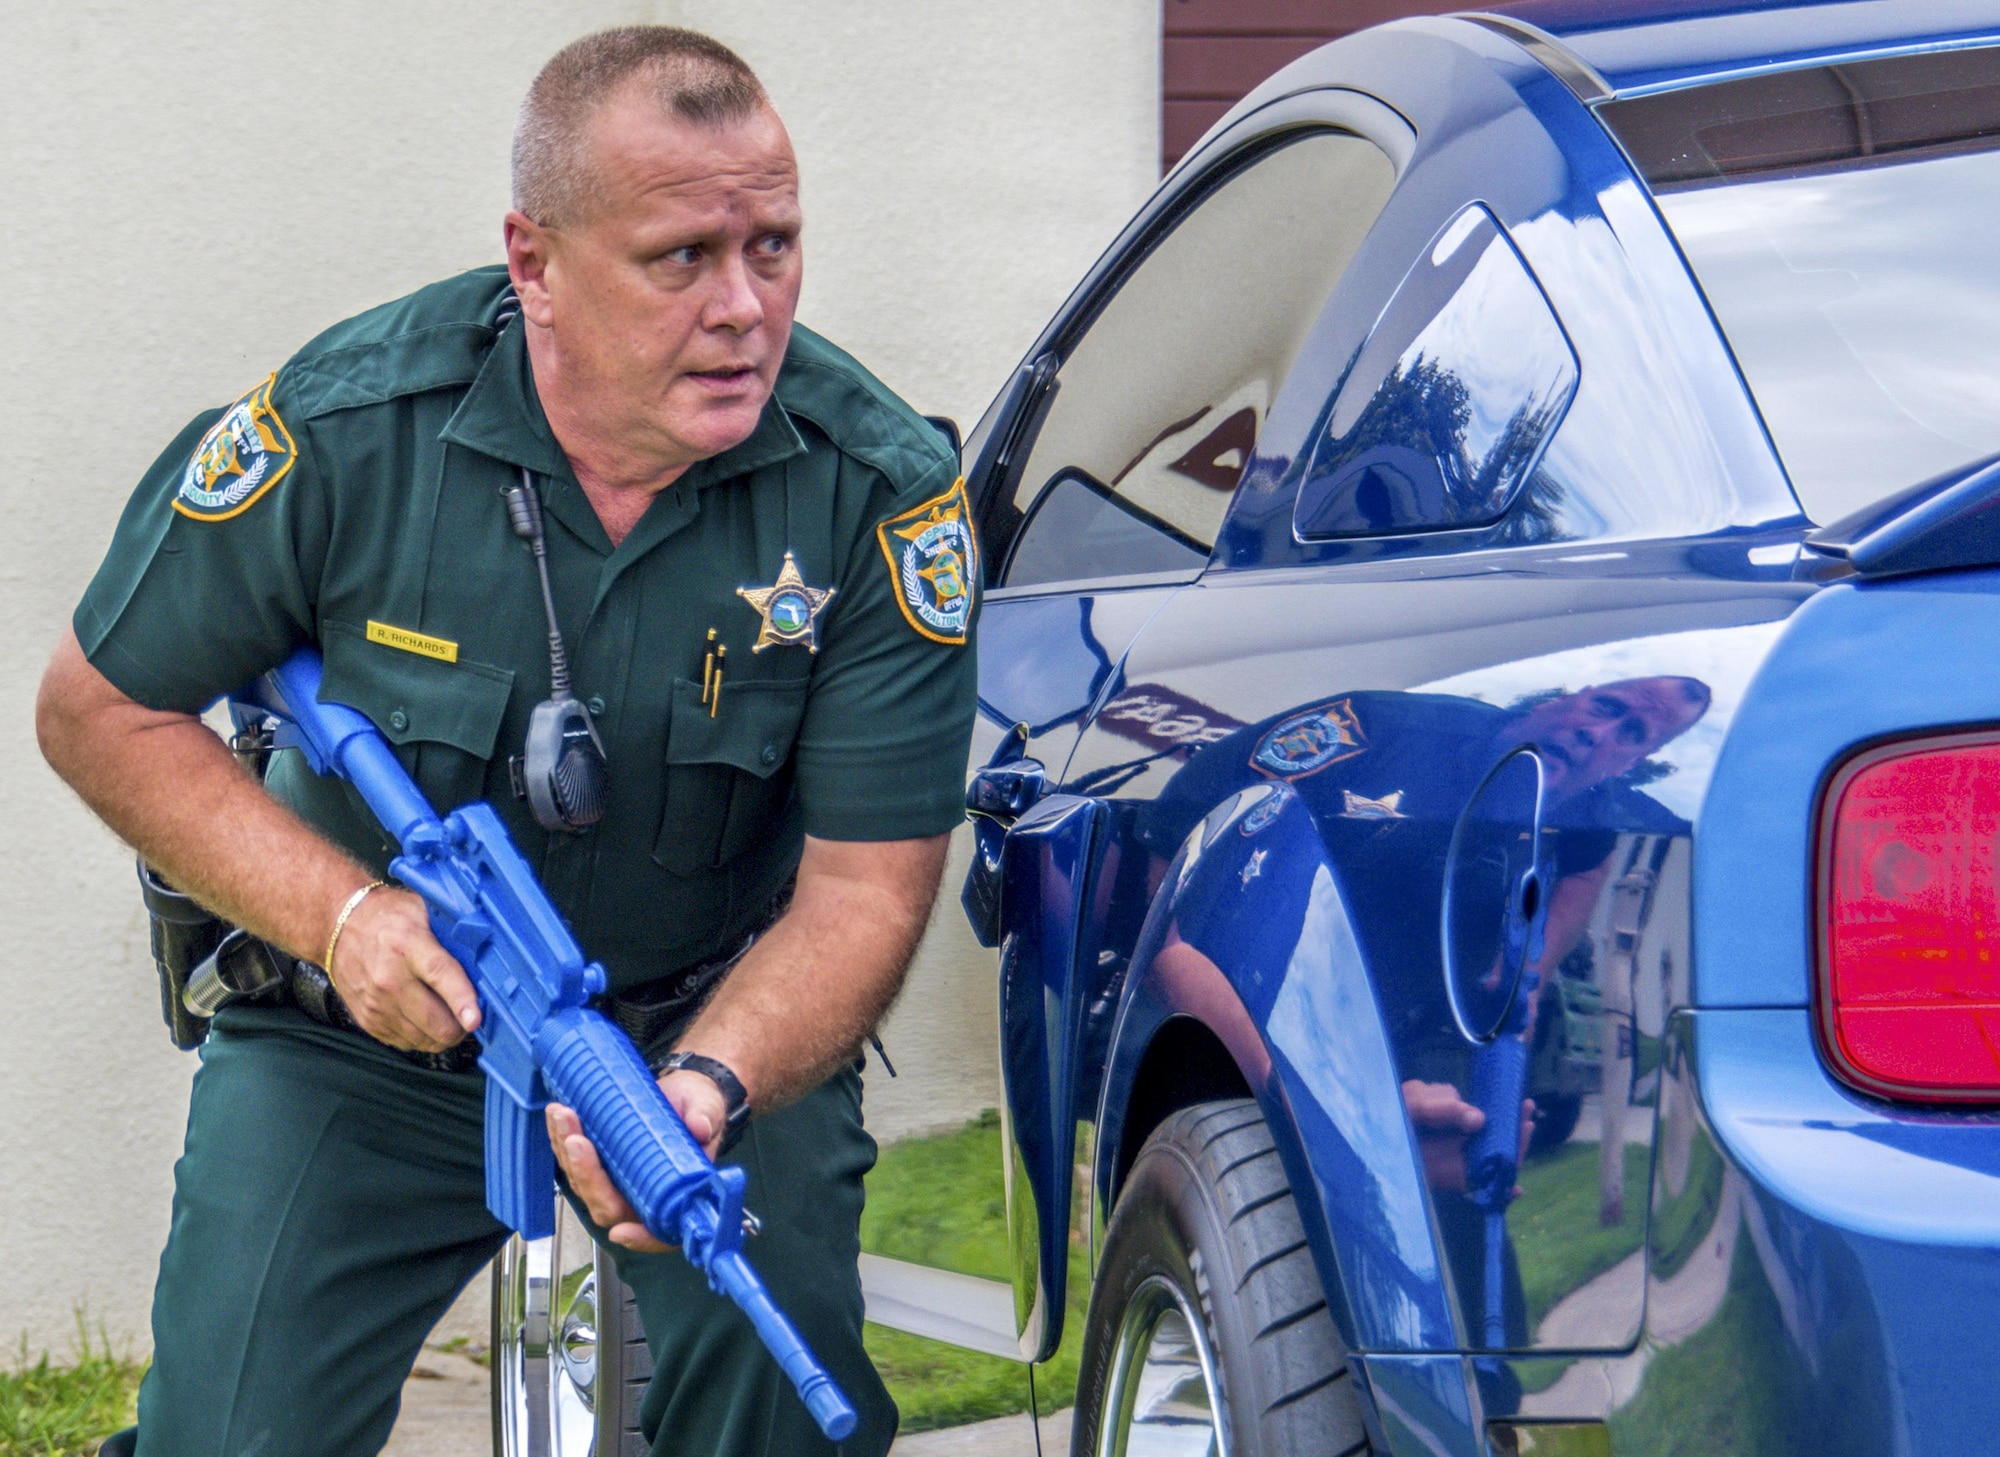 Deputy Ross Richards, Walton County Sheriff’s Office, sweeps the entrance of the building in response to a report of shots fired at the 20th Space Control Squadron during active shooter training at site C-6 Eglin Air Force Base, Fla., June 27. Walton County deputies and first responders from Eglin participated in the joint exercise in which a person on the second floor fired their weapon. The purpose of the joint exercise to improve local active shooter processes, communication, and response coordination. (U.S. Air Force photo/Kristin Stewart)